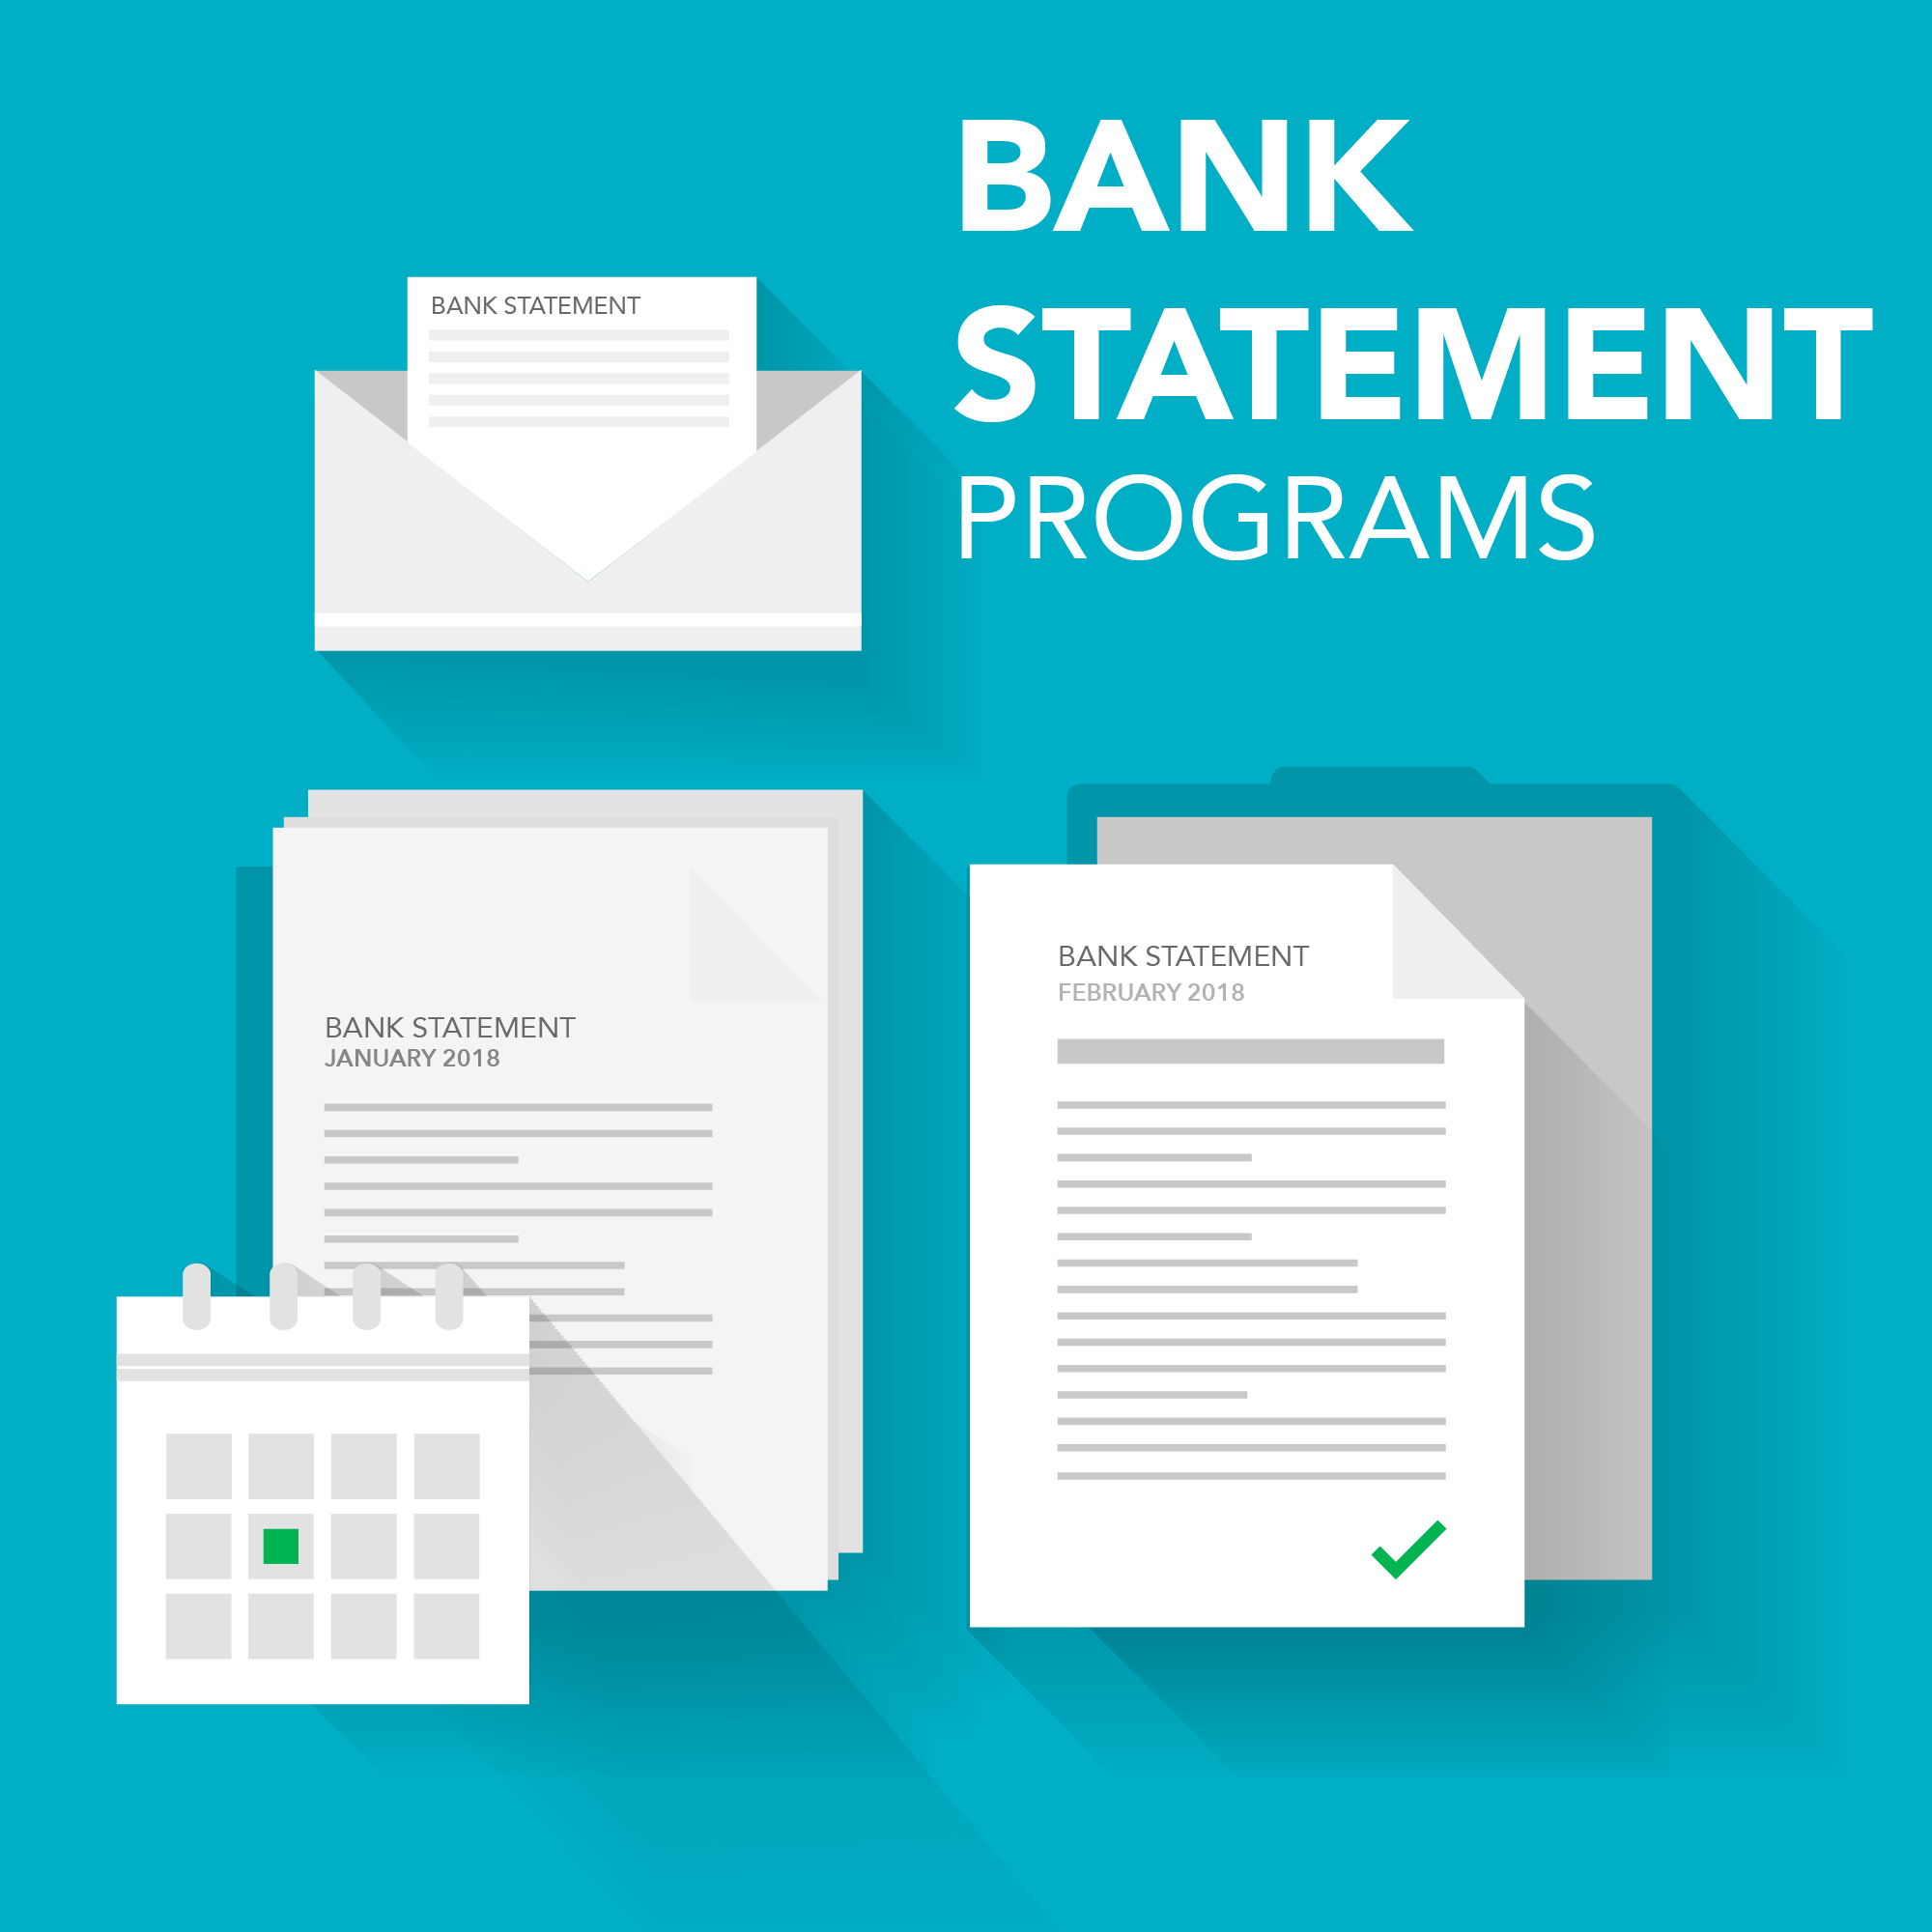 Bank Statement Programs | Products and Services | Nu Level Equity | Mortgage Services